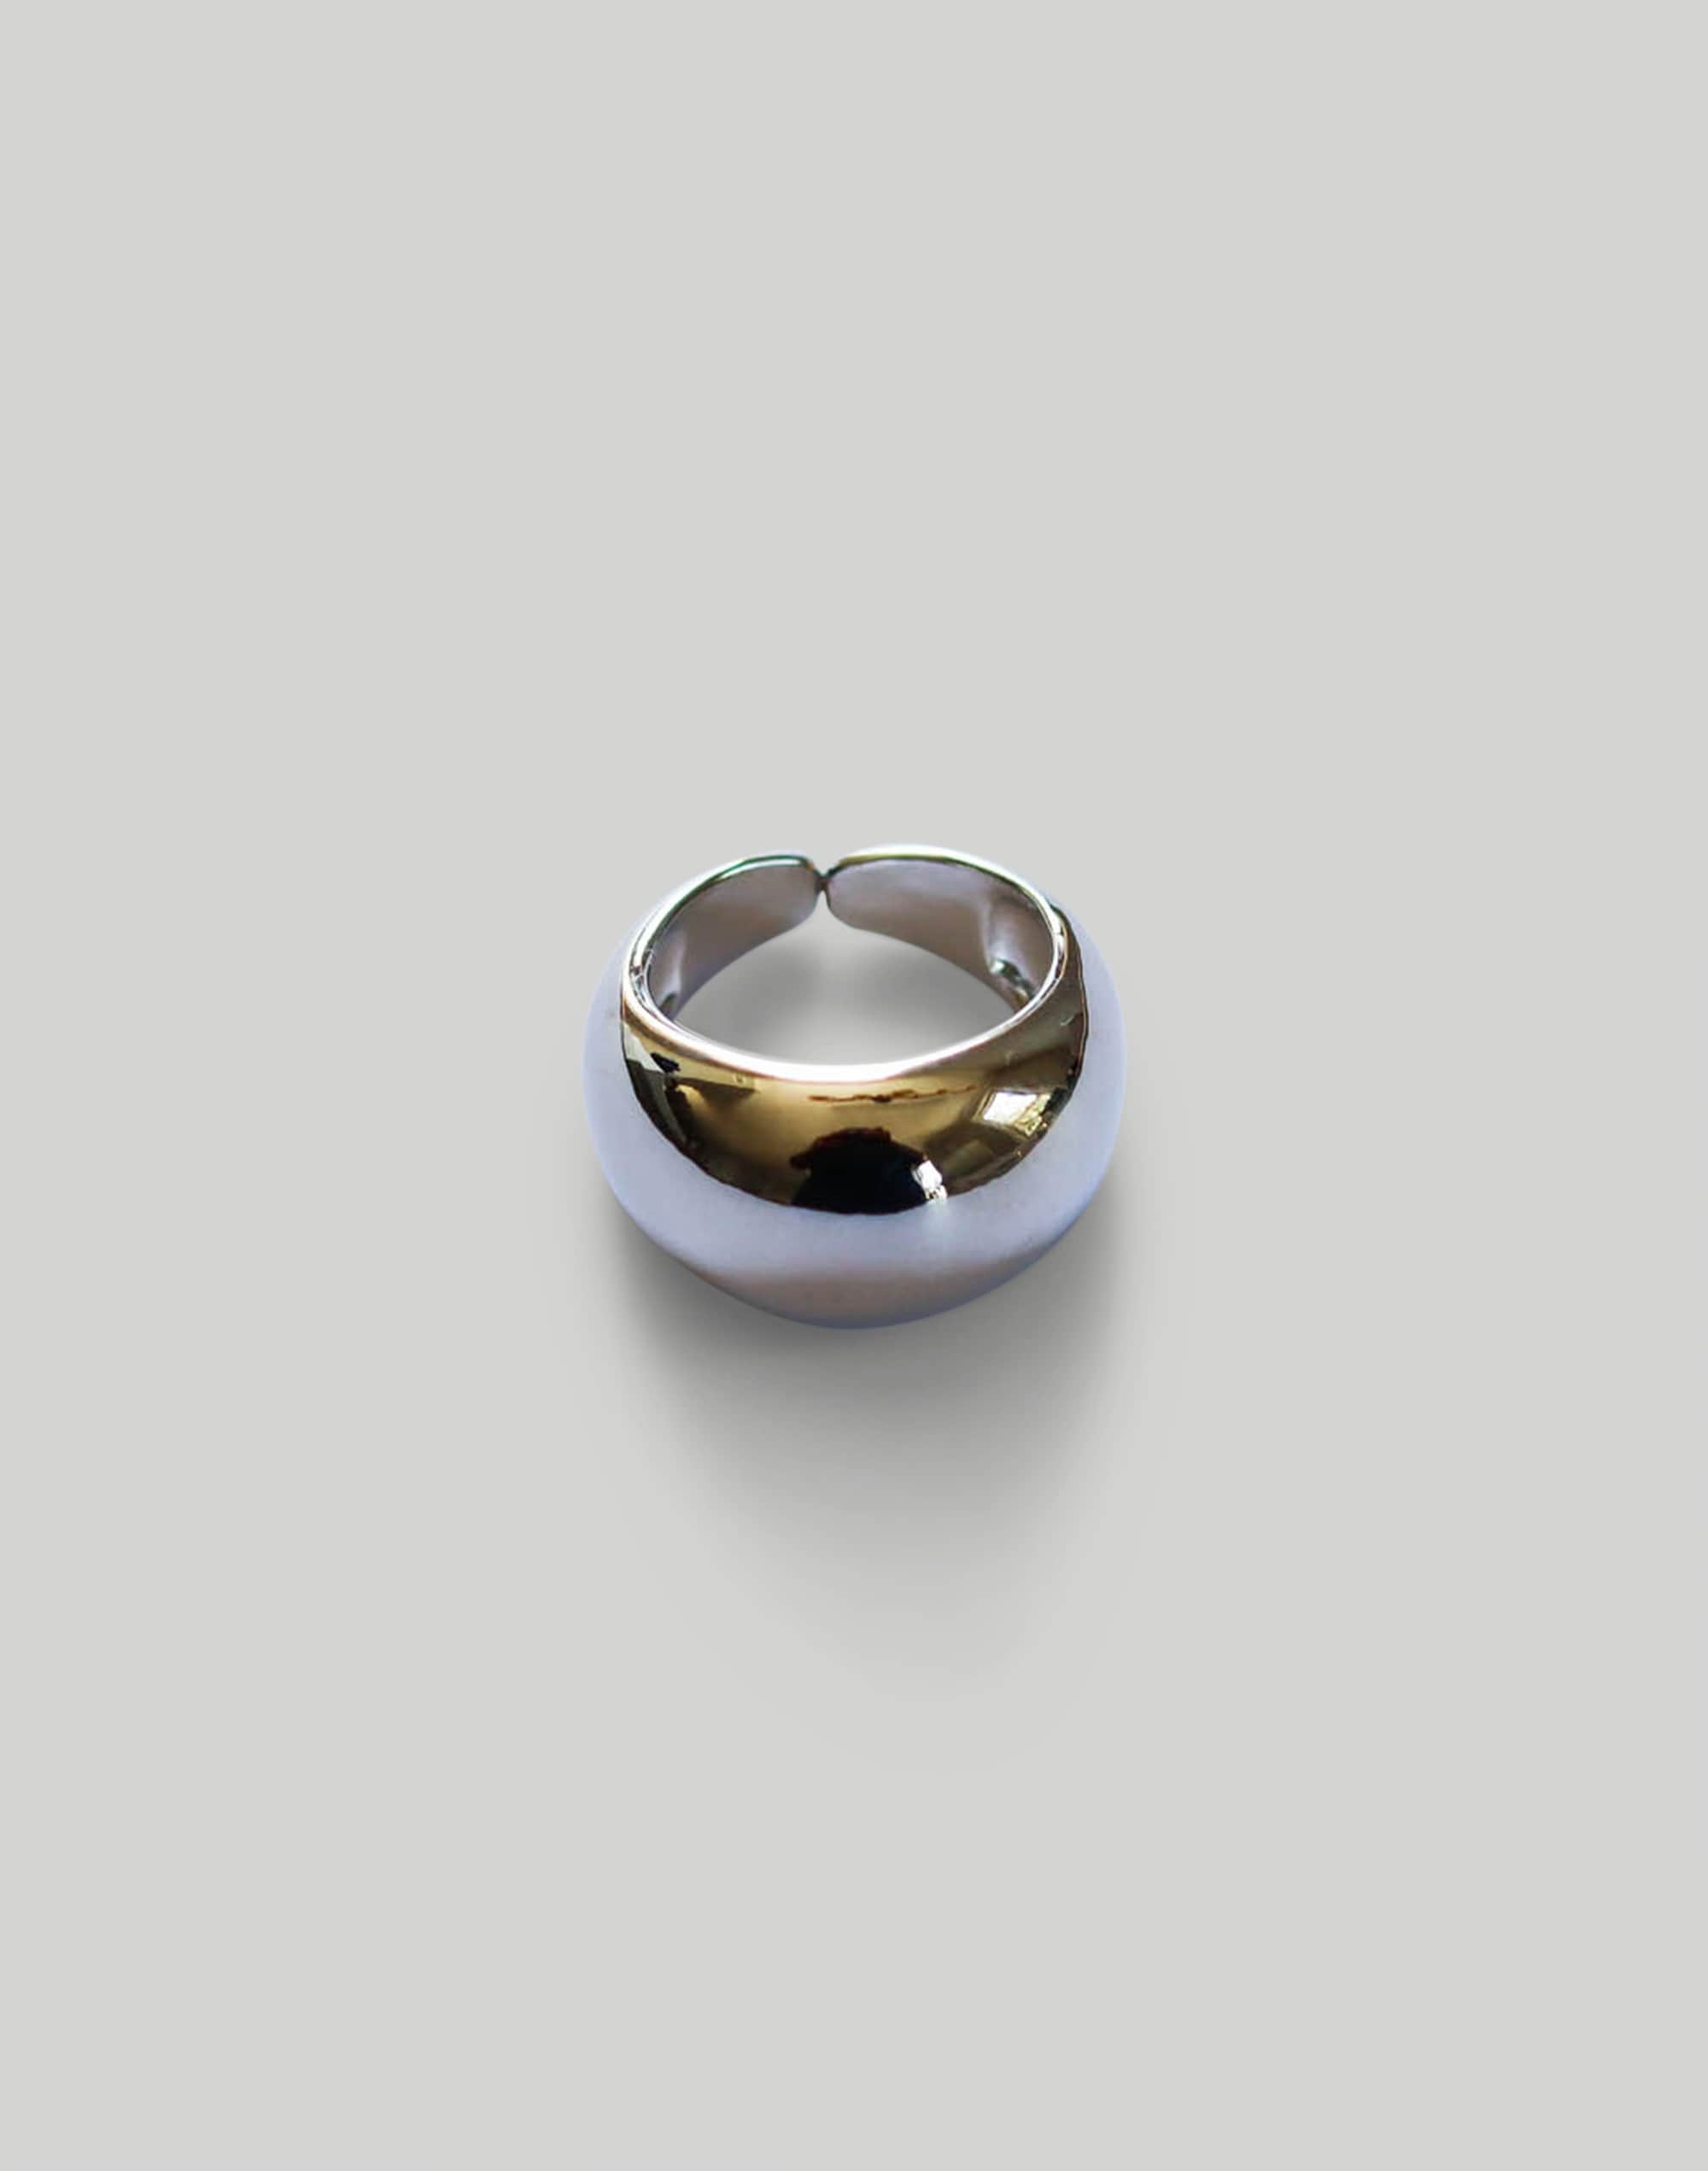 Abcrete & Co. The Adjustable Bold Dome Ring - Silver